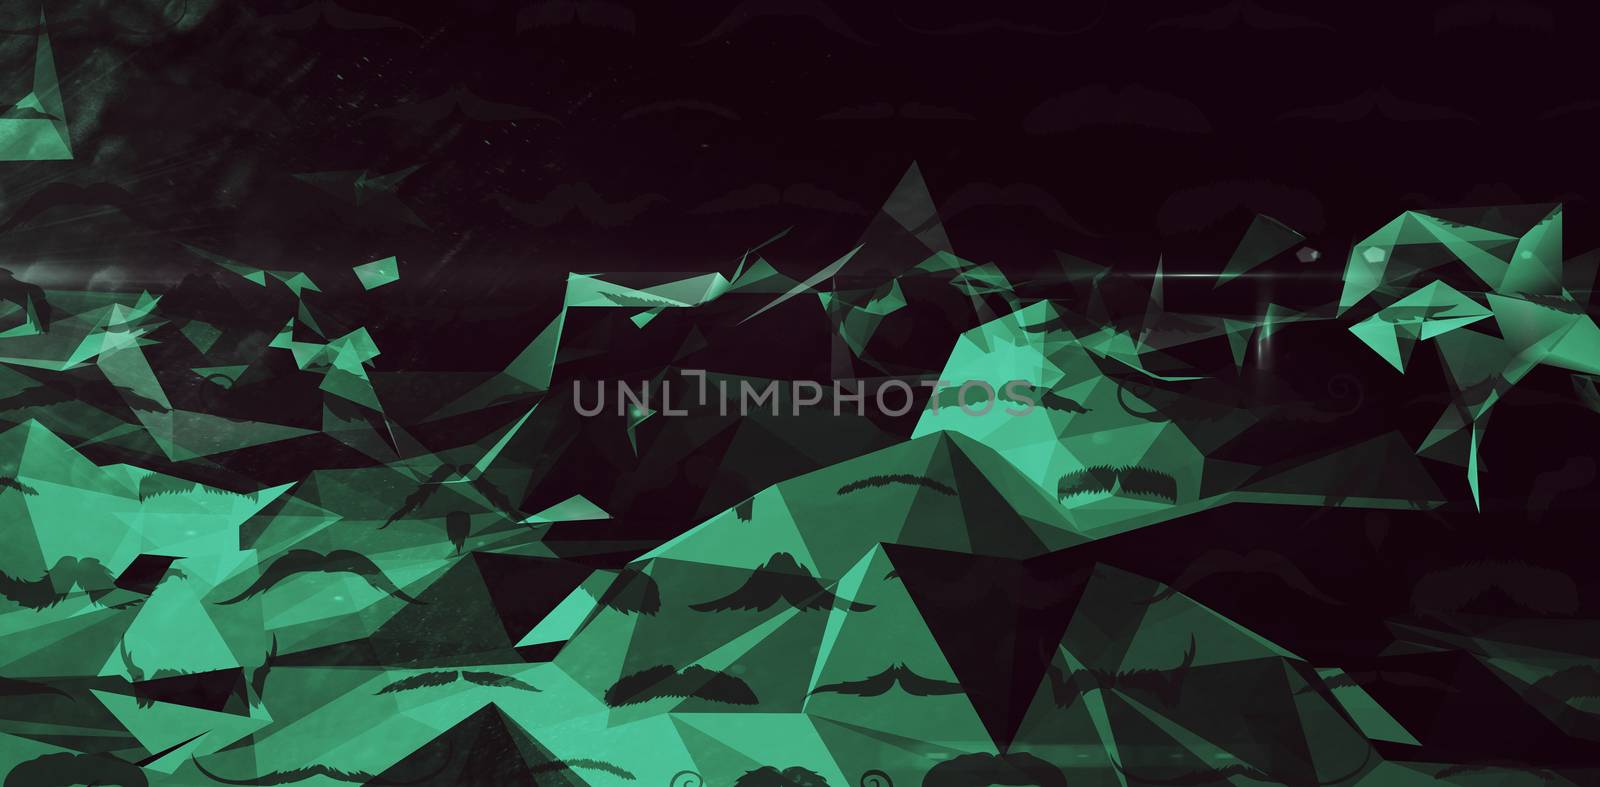 Digitally generated abstract background